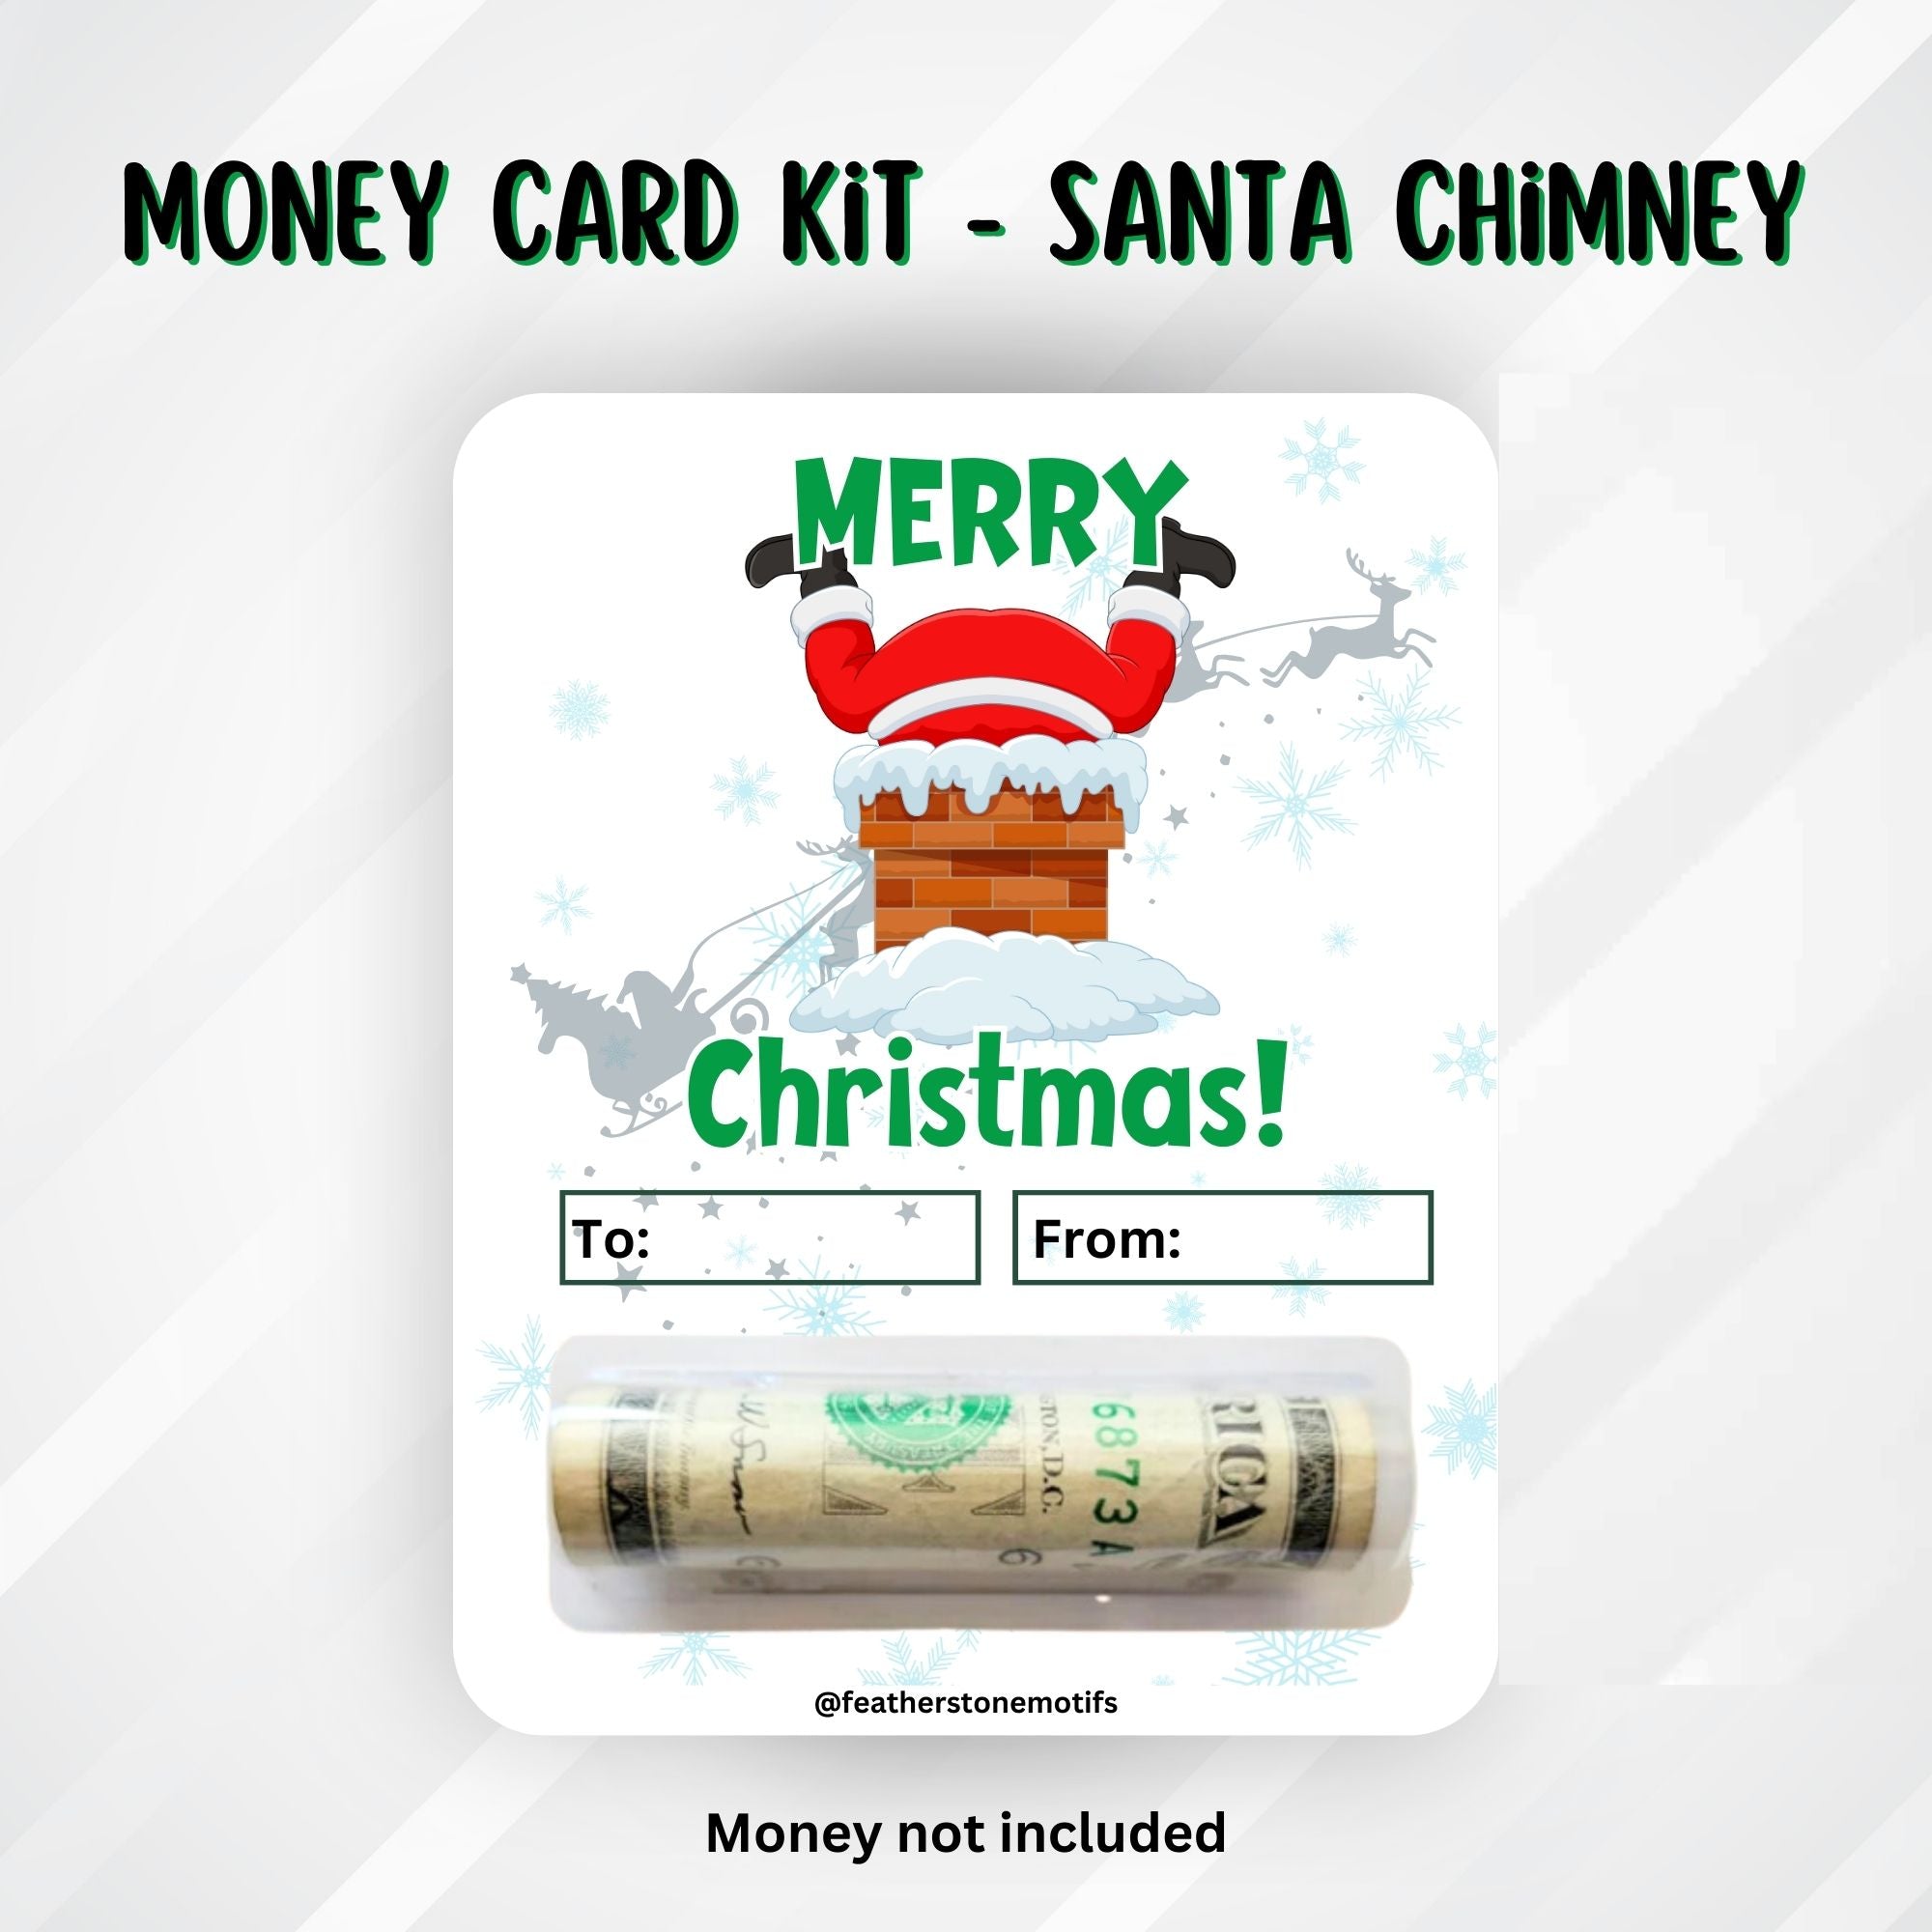 This image shows the money tube attached to the Santa Chimney Money Card.